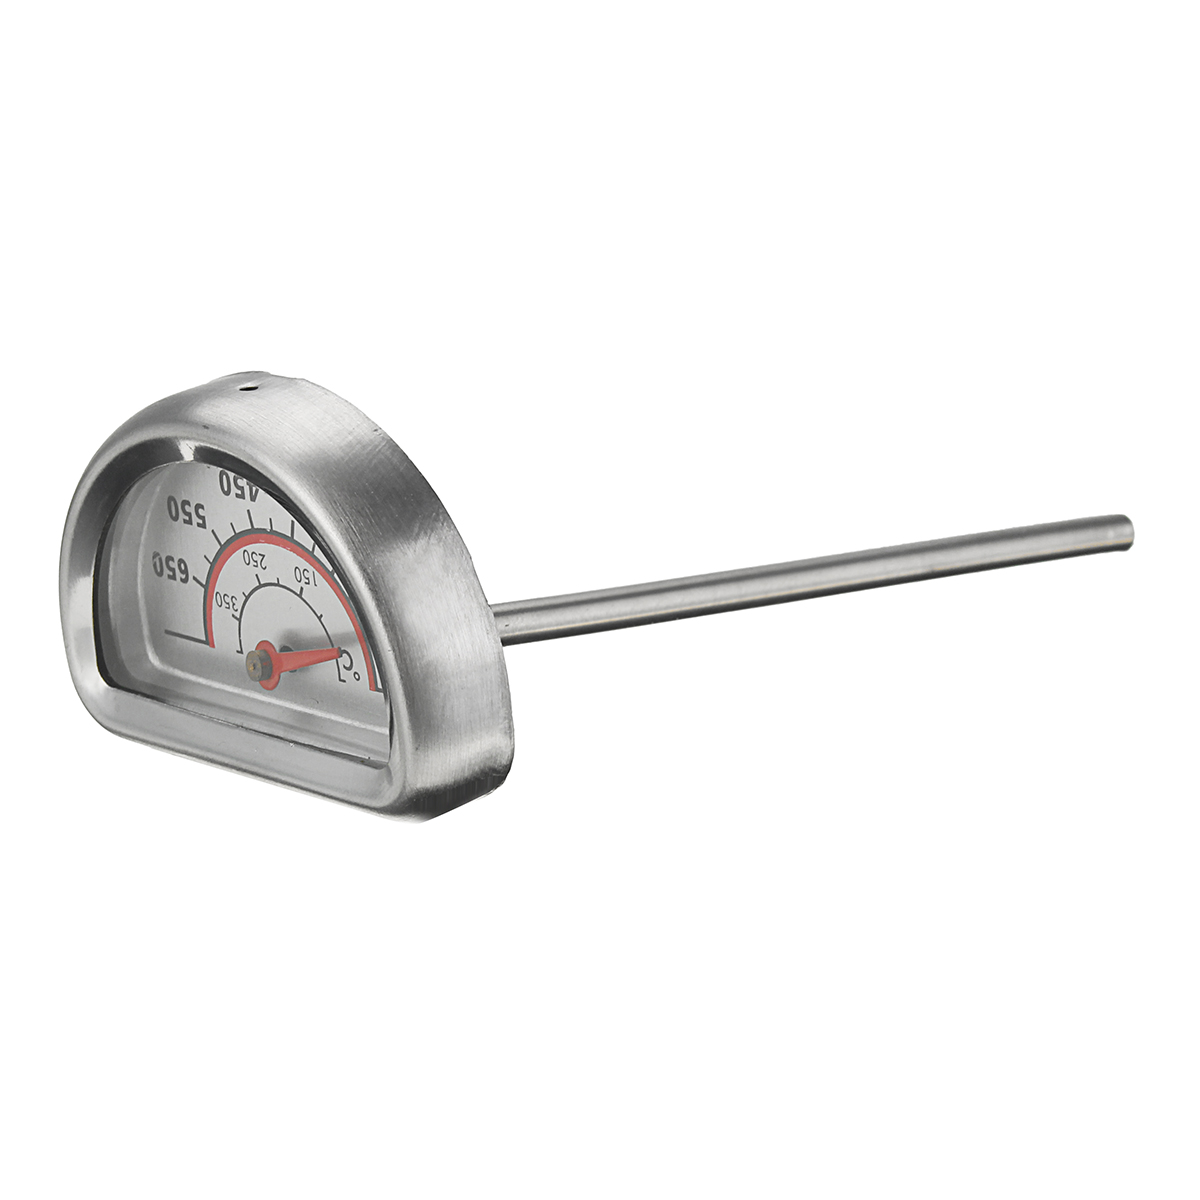 0400-BBQ-Bimetallic-Replacement-Thermometer-Heat-Indicator-For-Charbroil-1336515